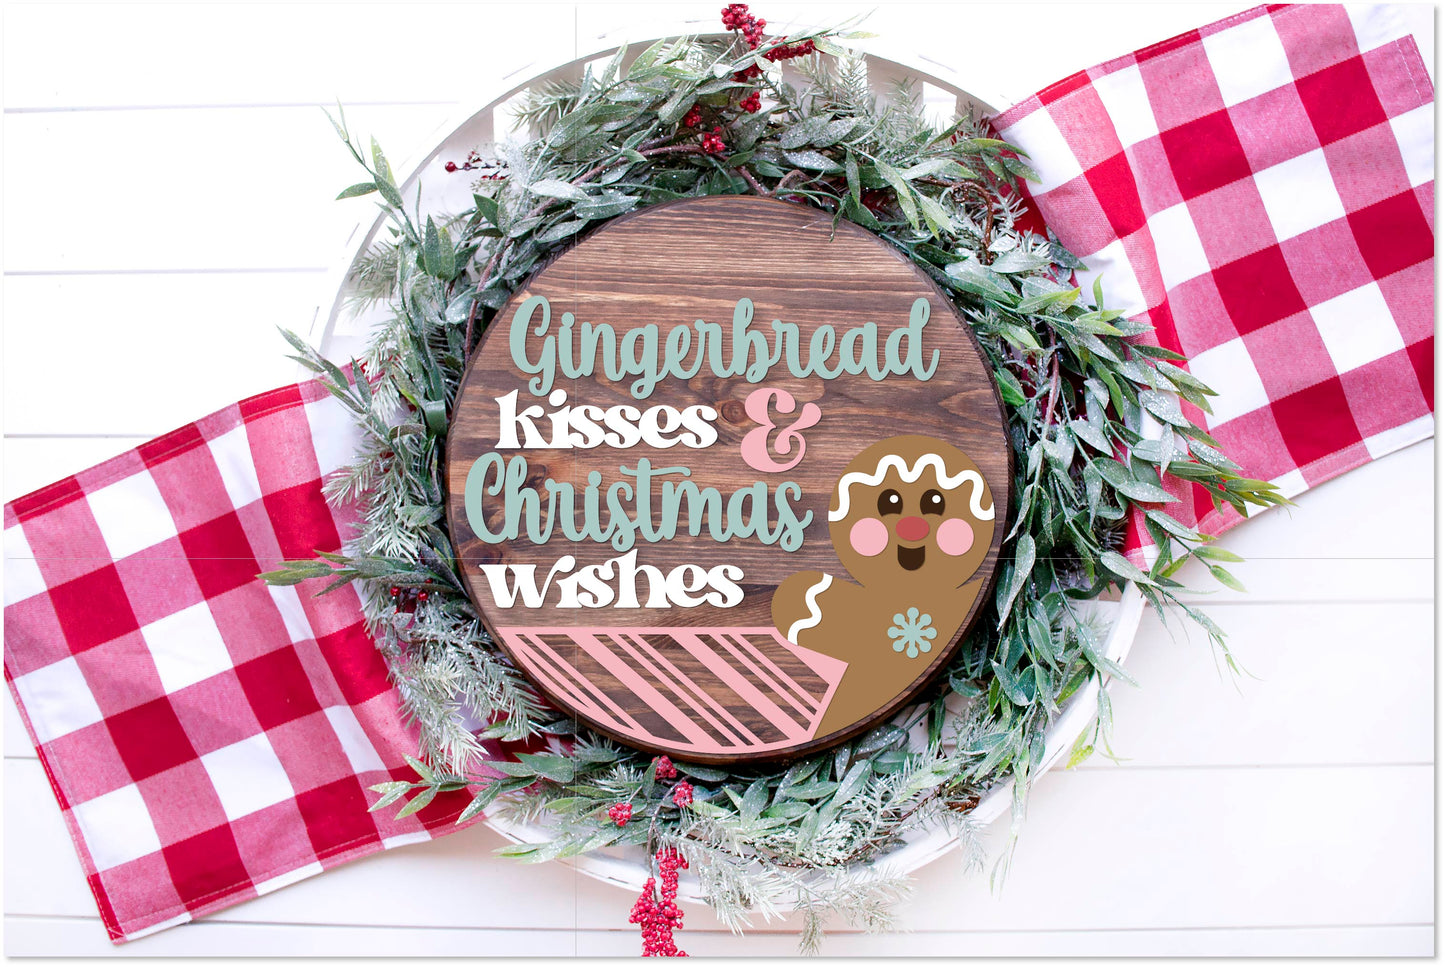 Gingerbread kisses and Christmas wishes sign